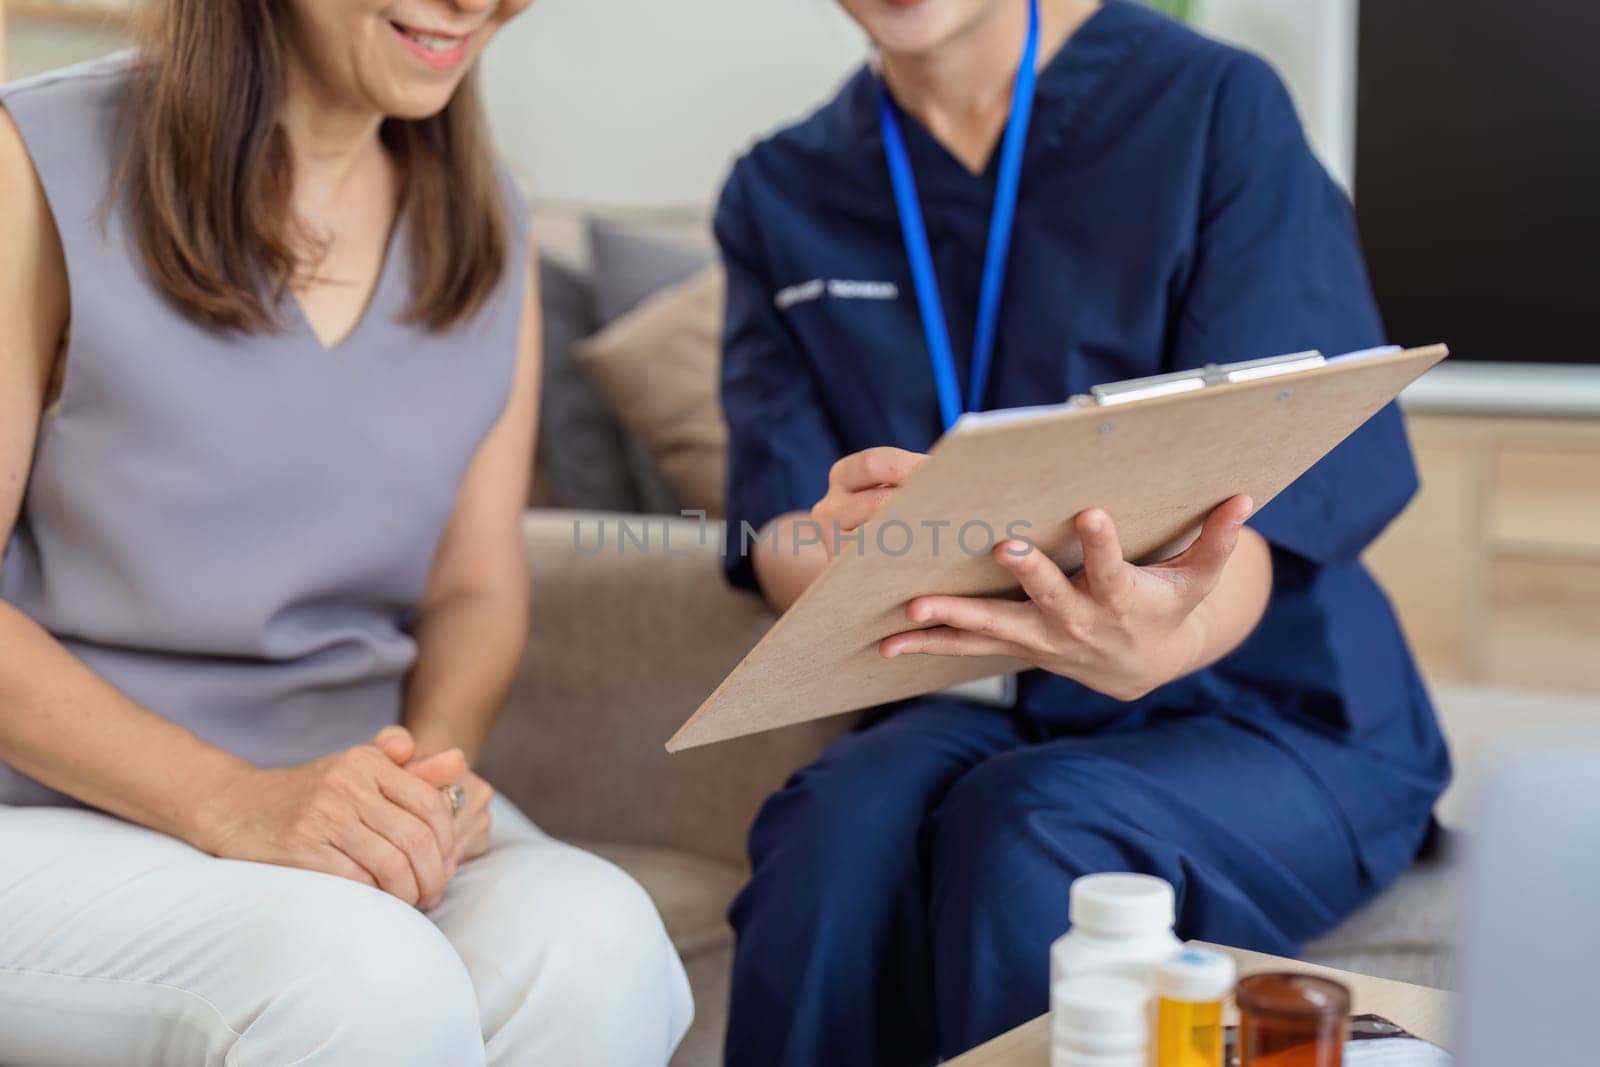 healthcare worker filling in a form with a senior woman during a home health visit.